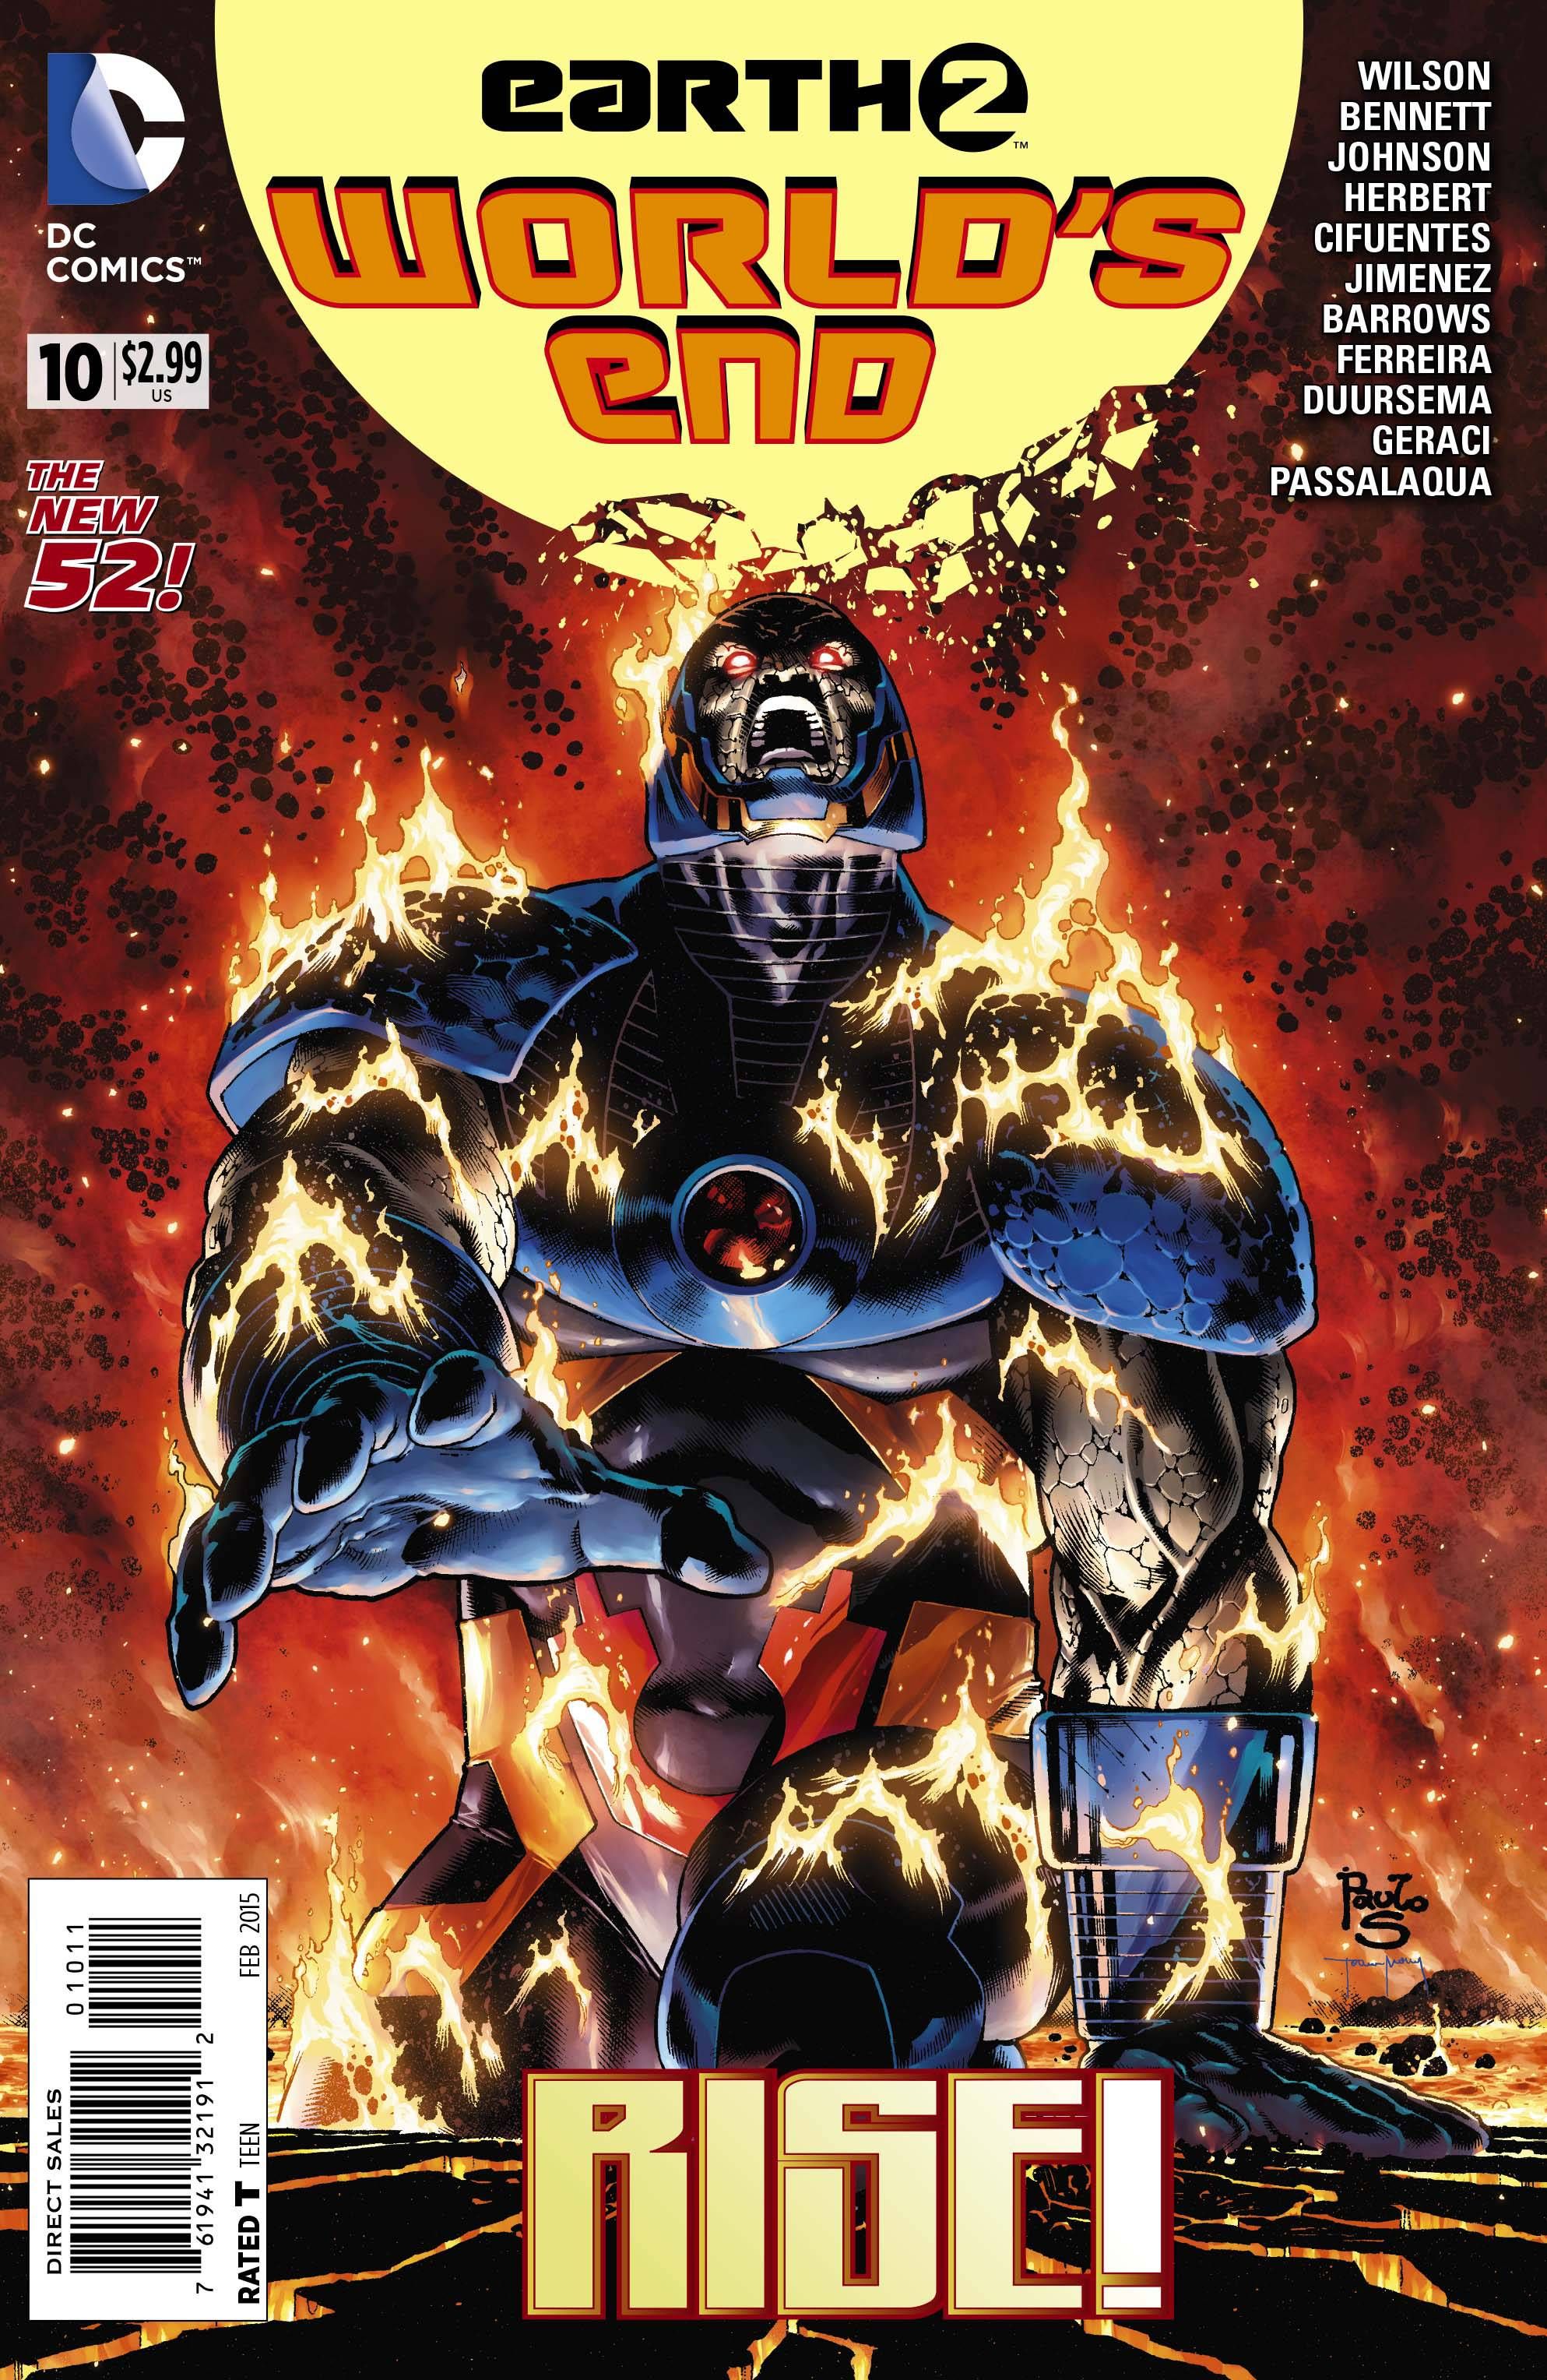 Earth 2 Worlds End #10 Comic